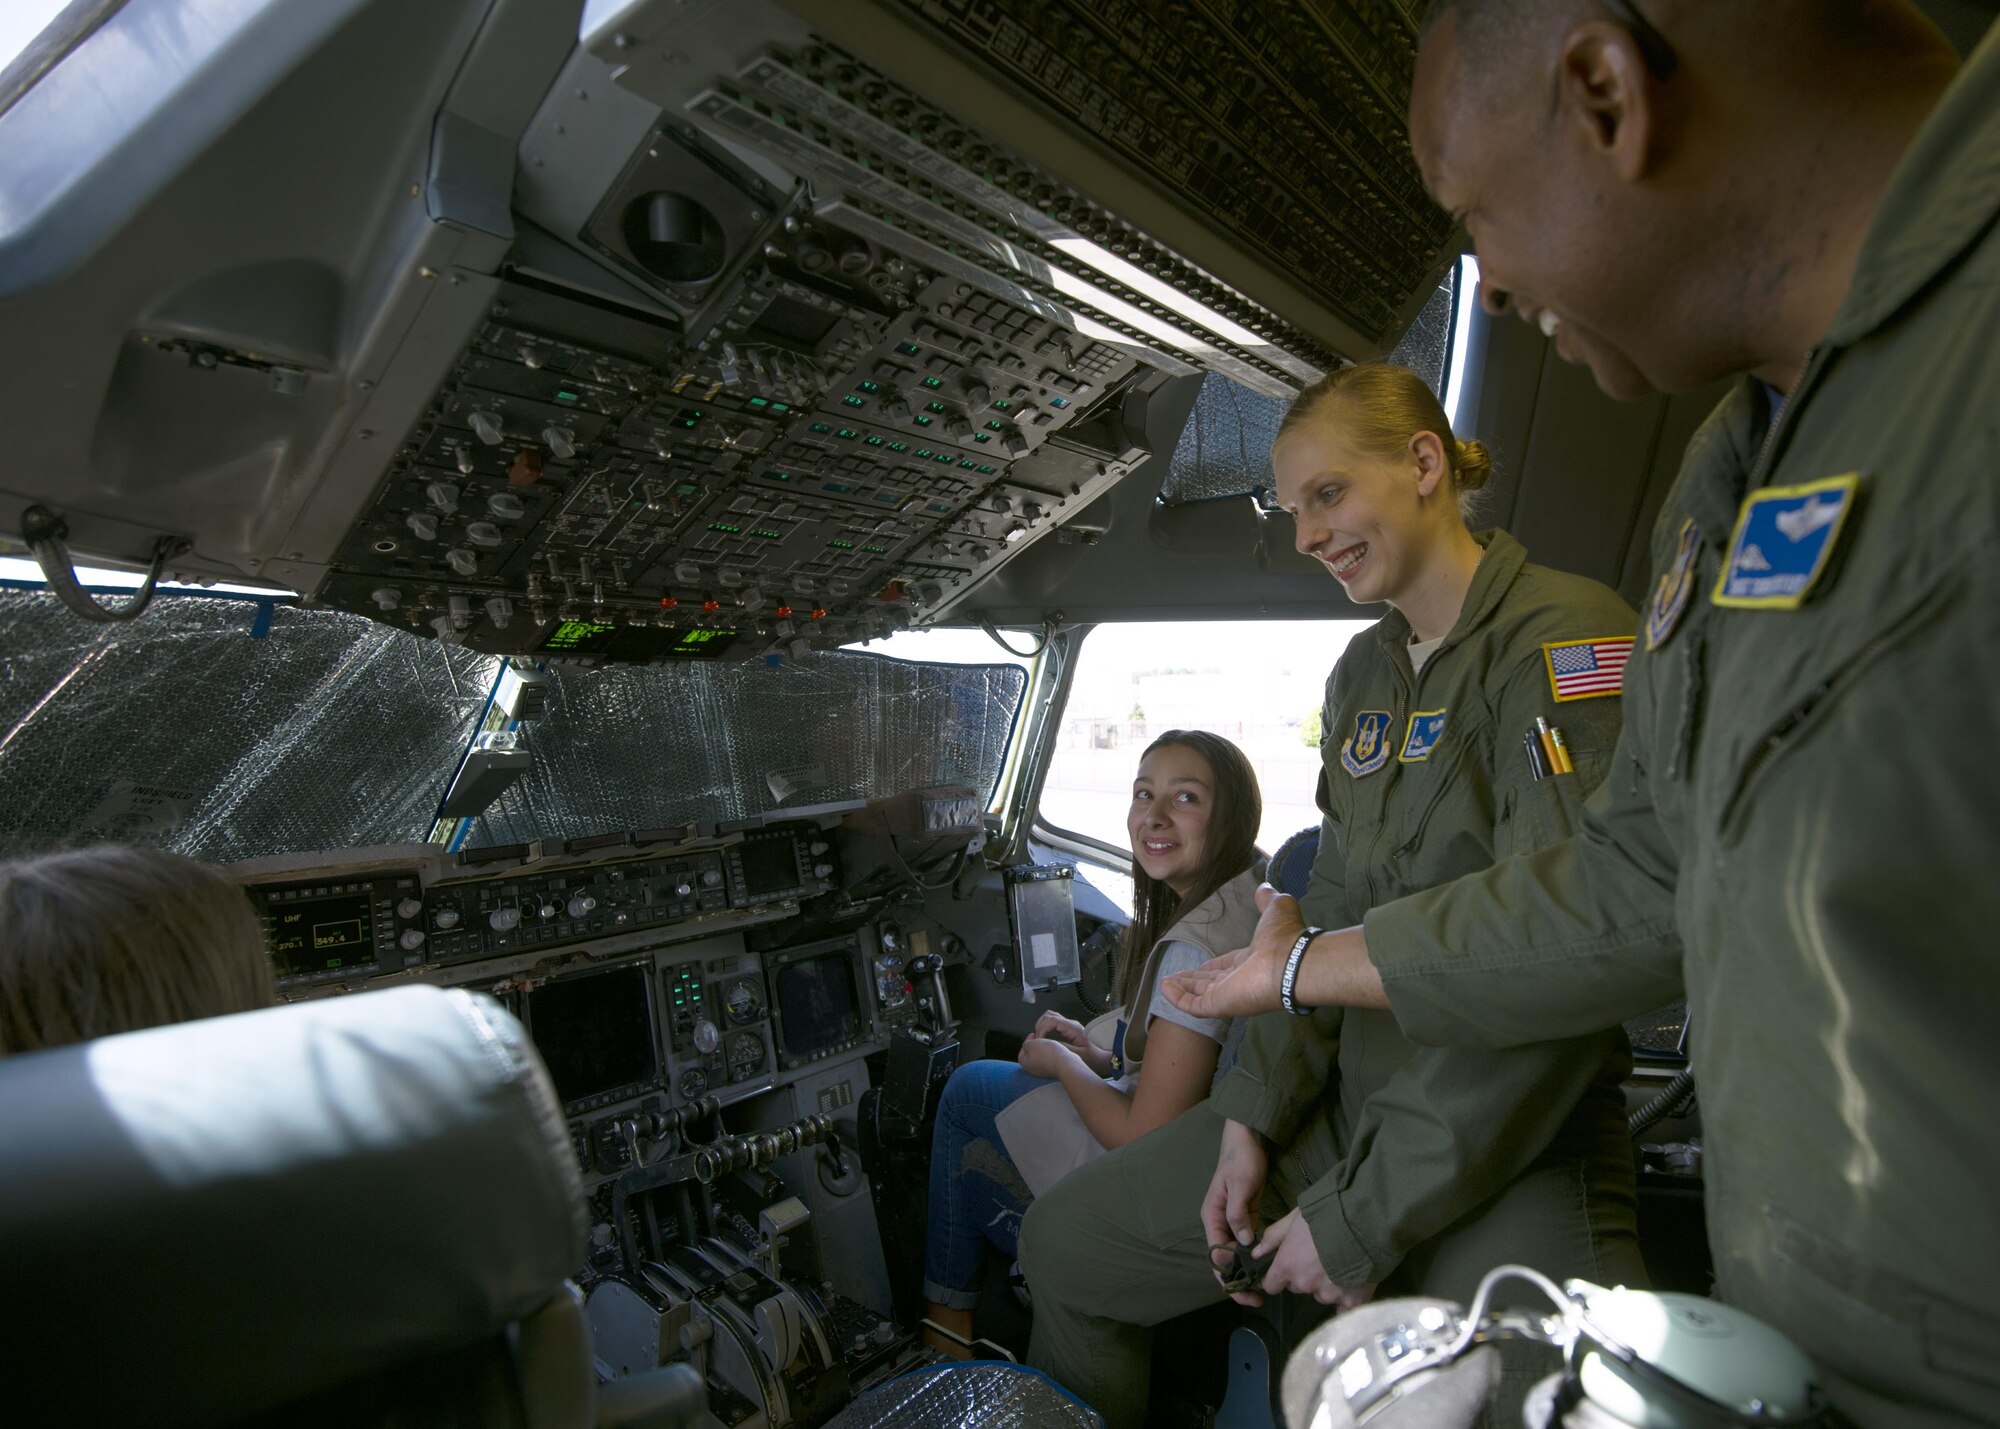 Senior Master Sgt. Derek Bryant, a loadmaster with the 446th Operations Group, and Senior Airman Bridgette Johnson, 728th Airlift Squadron loadmaster, show members of Girl Scout Troop 40931 the flight deck of a C-17 Globemaster III July 9, 2017, at McChord Field. During the visit, seven girl scouts were able to tour the 446th AW, a C-17, control tower, and learned survival tips from a Survival, Evasion, Resistance and Escape, instructor. (U.S. Air Force photo by Tech. Sgt. Bryan Hull)